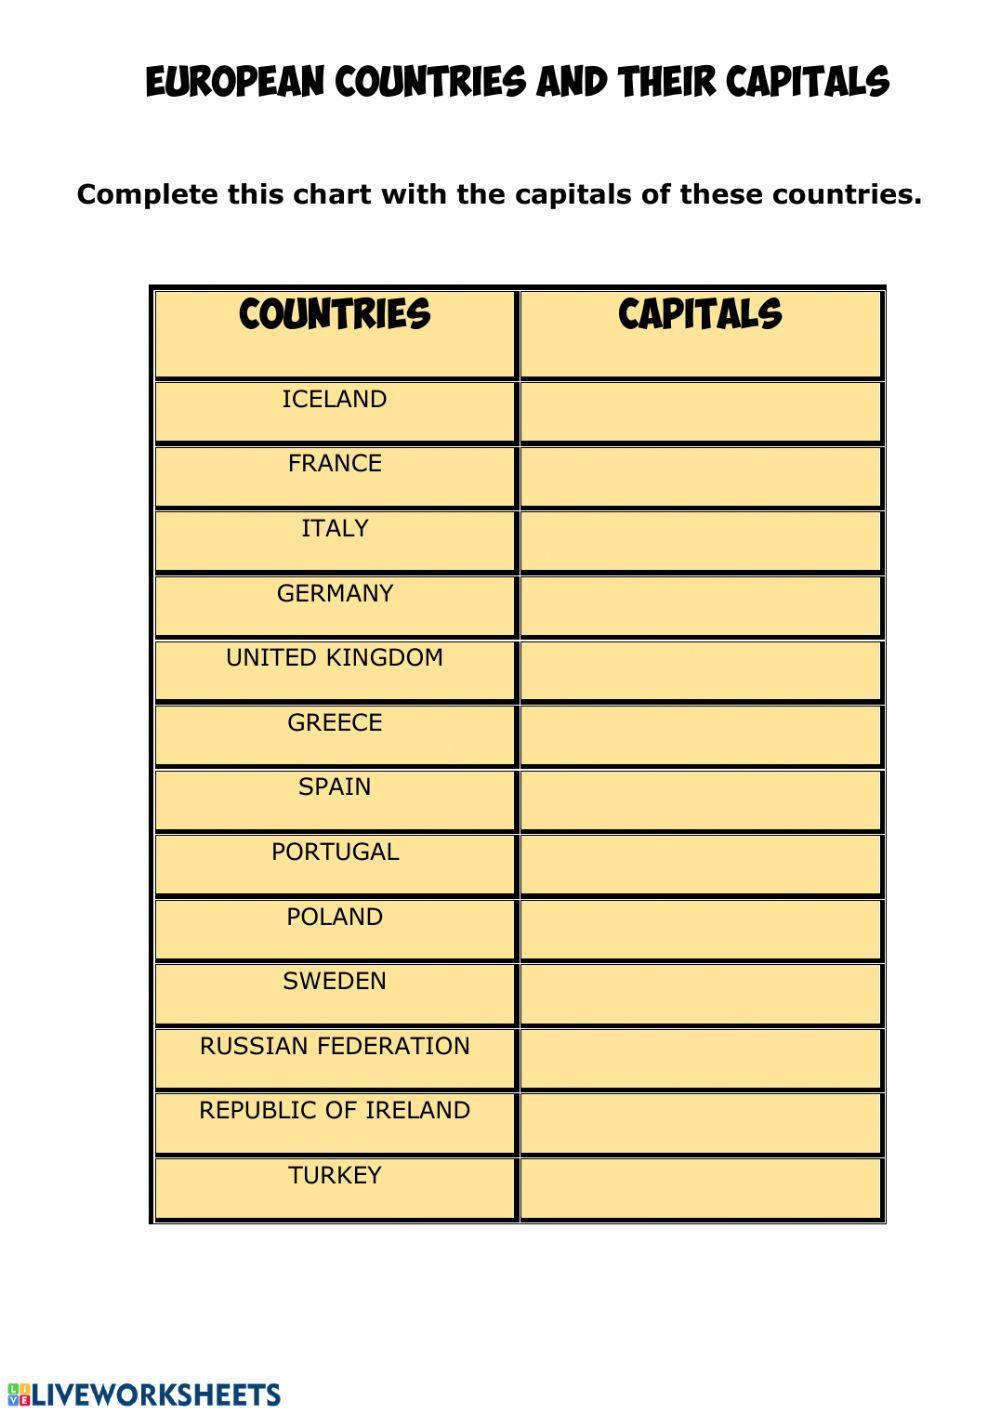 European countries and capitals